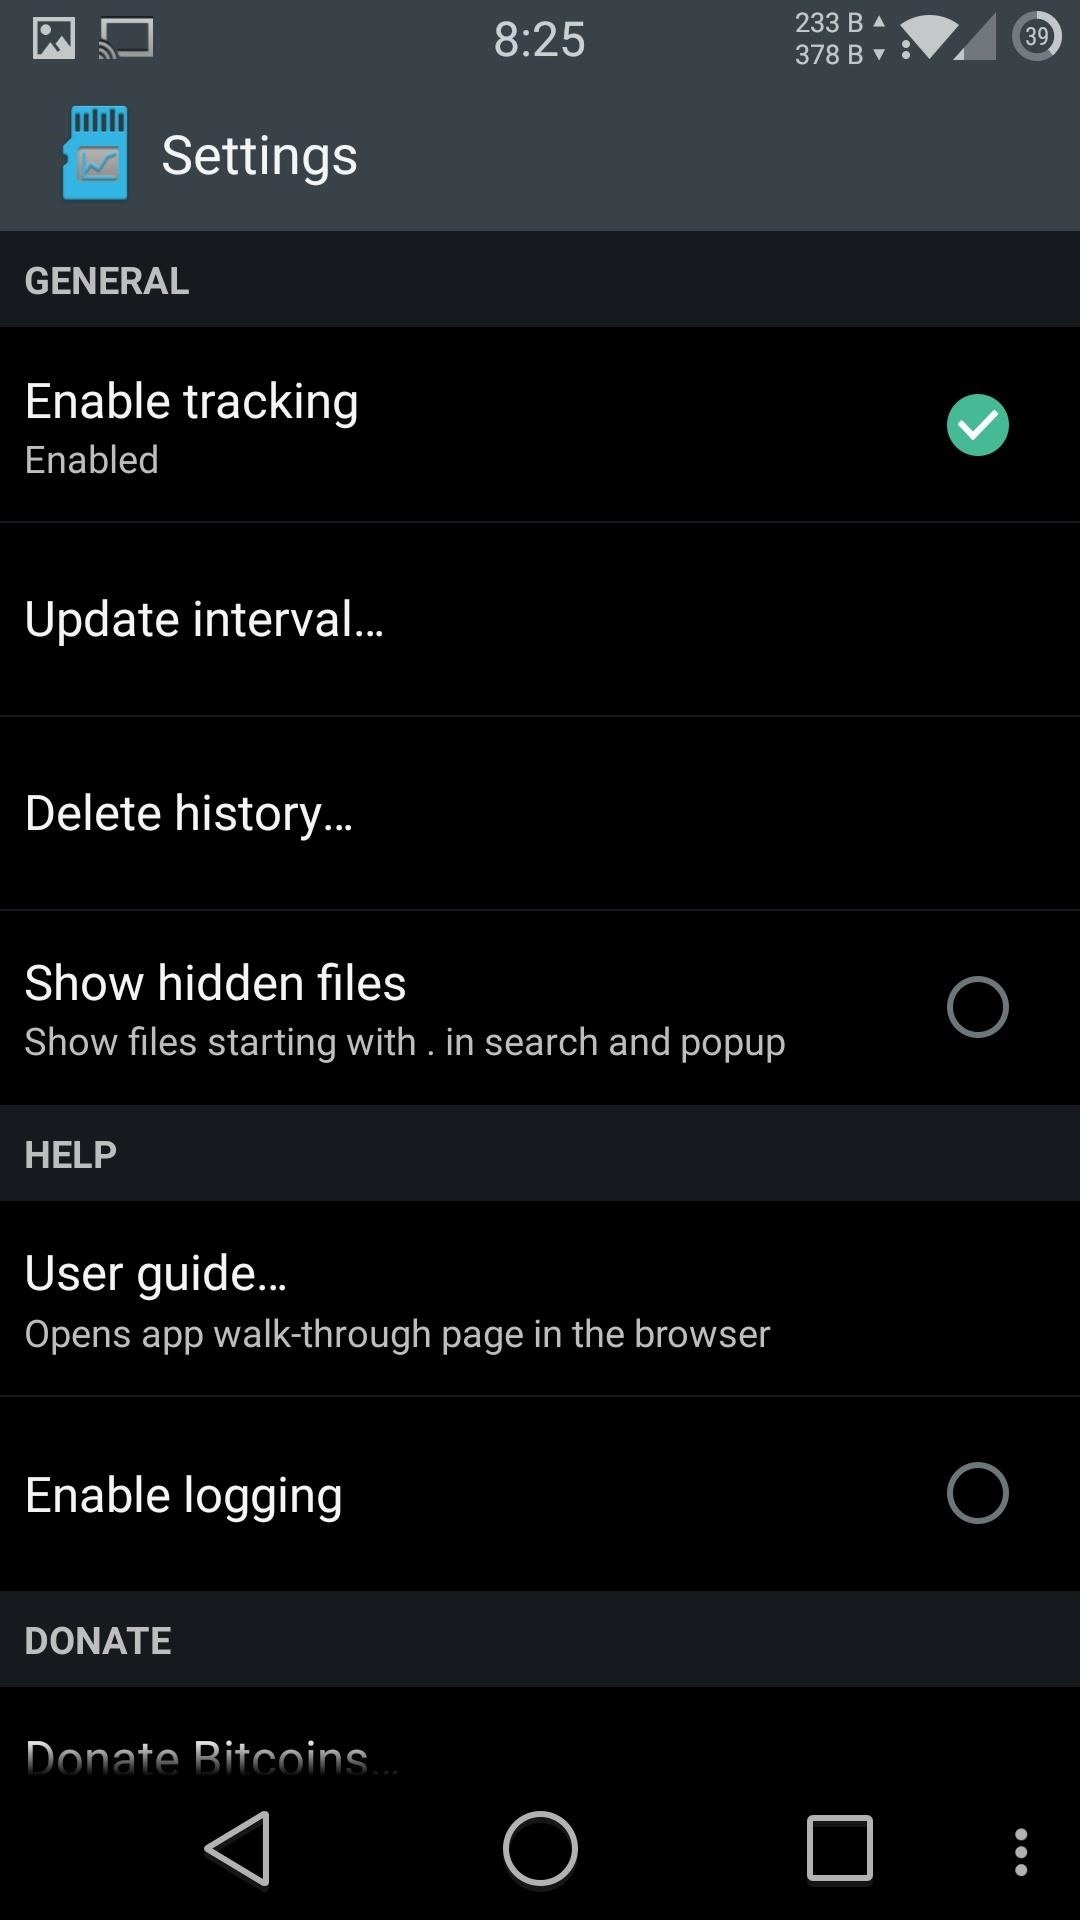 Auto-Scan for Created, Deleted, & Modified Files on Android